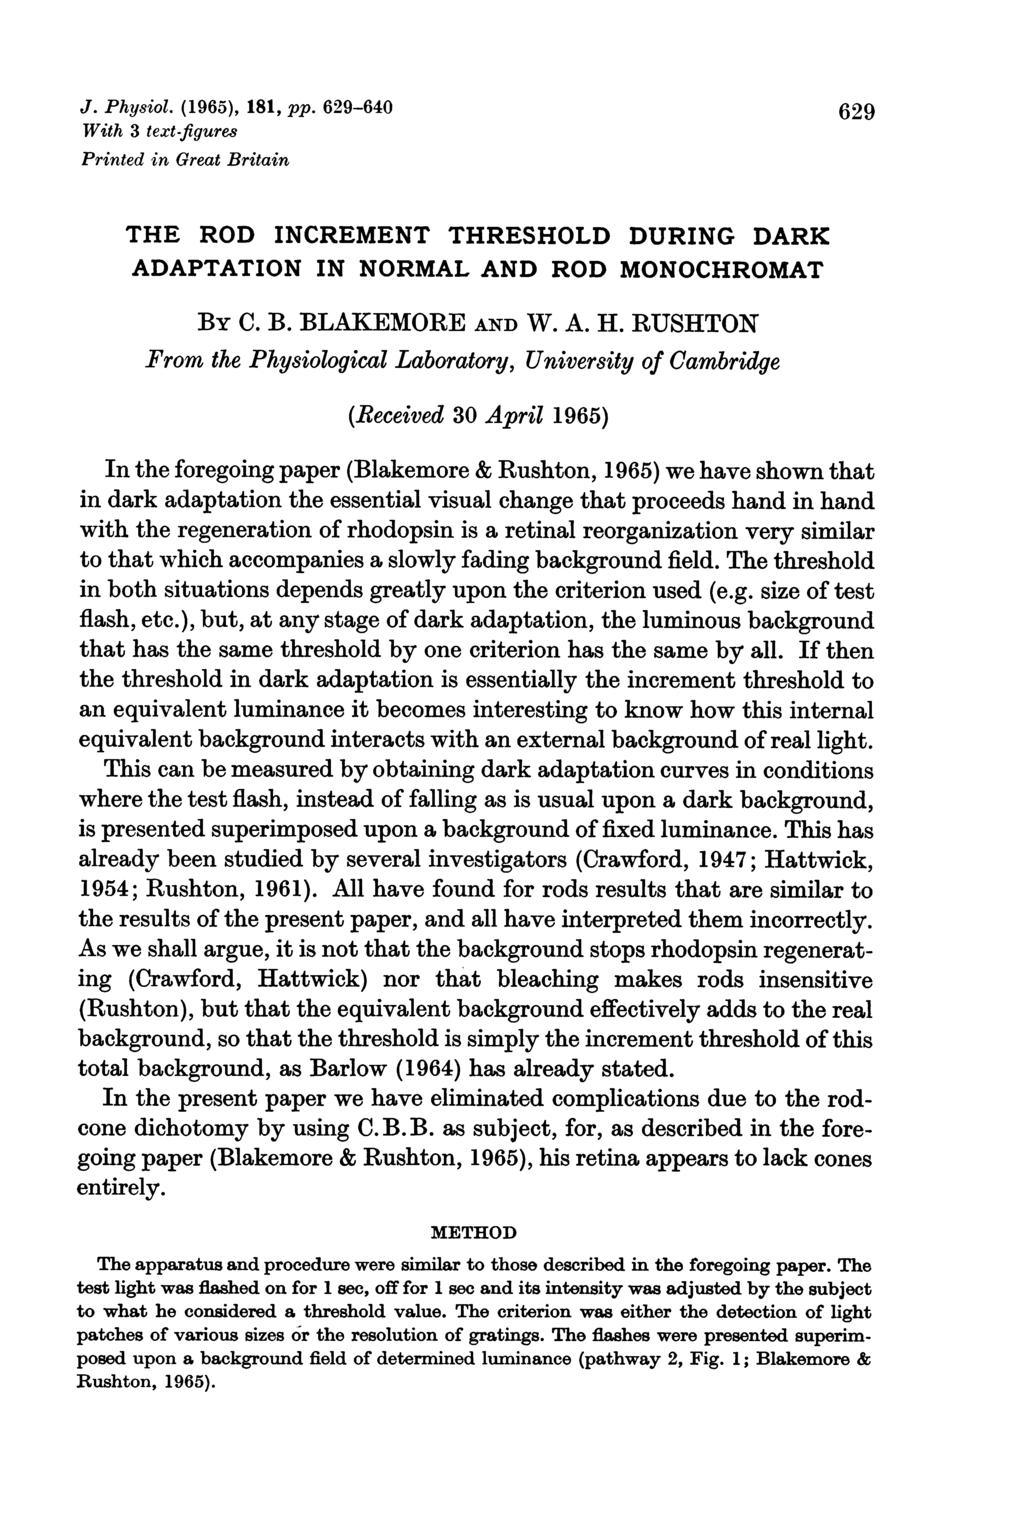 J. Physiol. (1965), 181, pp. 629-640 629 With 3 text-figures Printed in Great Britain THE ROD INCREMENT THRESHOLD DURING DARK ADAPTATION IN NORMAL AND ROD MONOCHROMAT BY C. B. BLAKEMORE AND W. A. H.